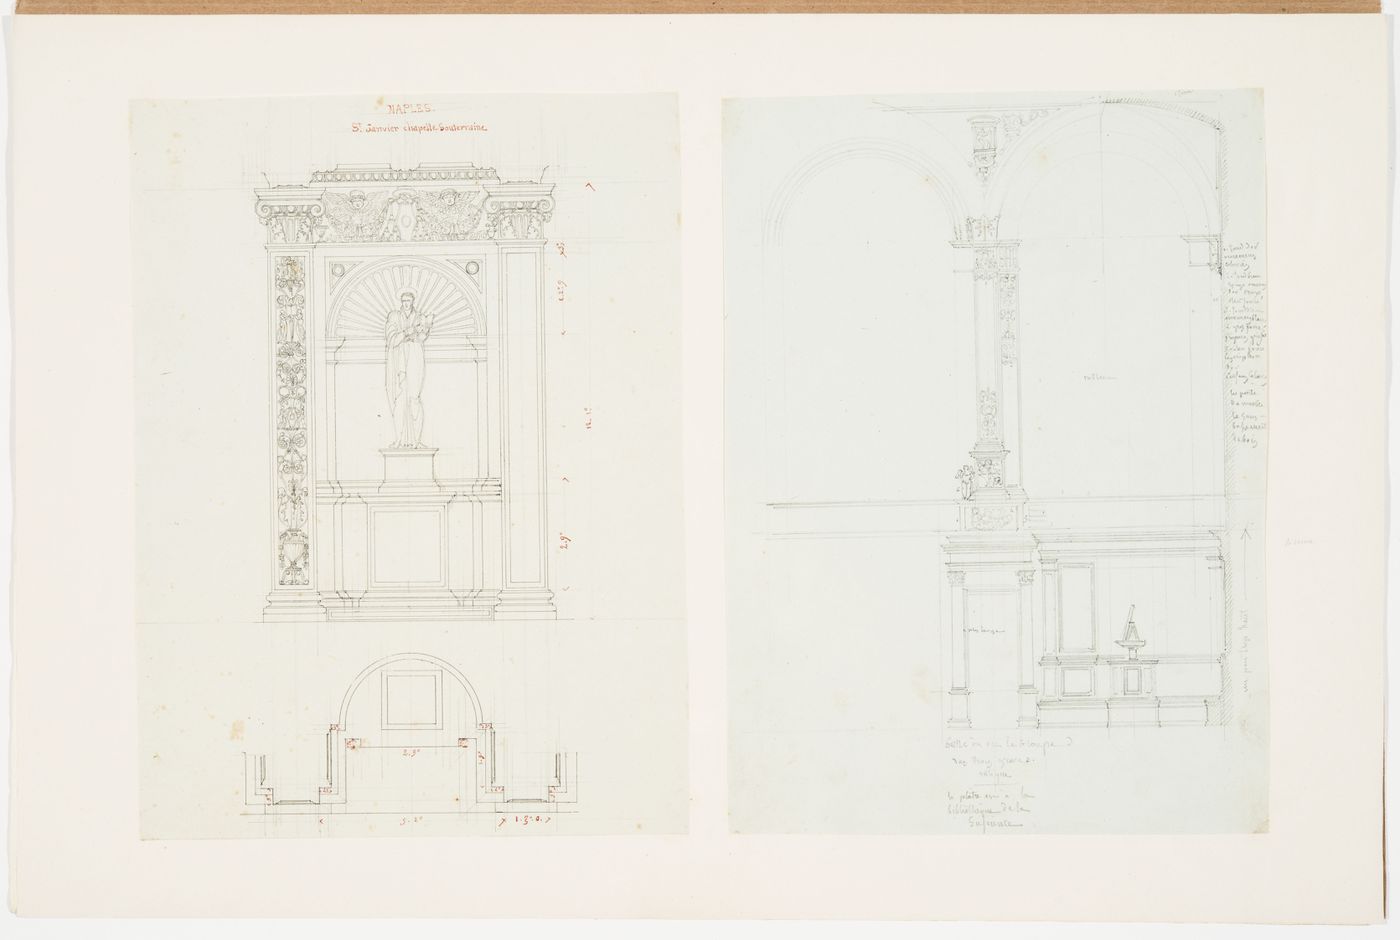 Elevation, ground plan of a niche from the aisle wall and a longitudinal section of the Cathedral through two levels showing two niches from the main nave and a side door and lectern from Cappella del Soccorso, Cathedral of San Gennaro, Naples